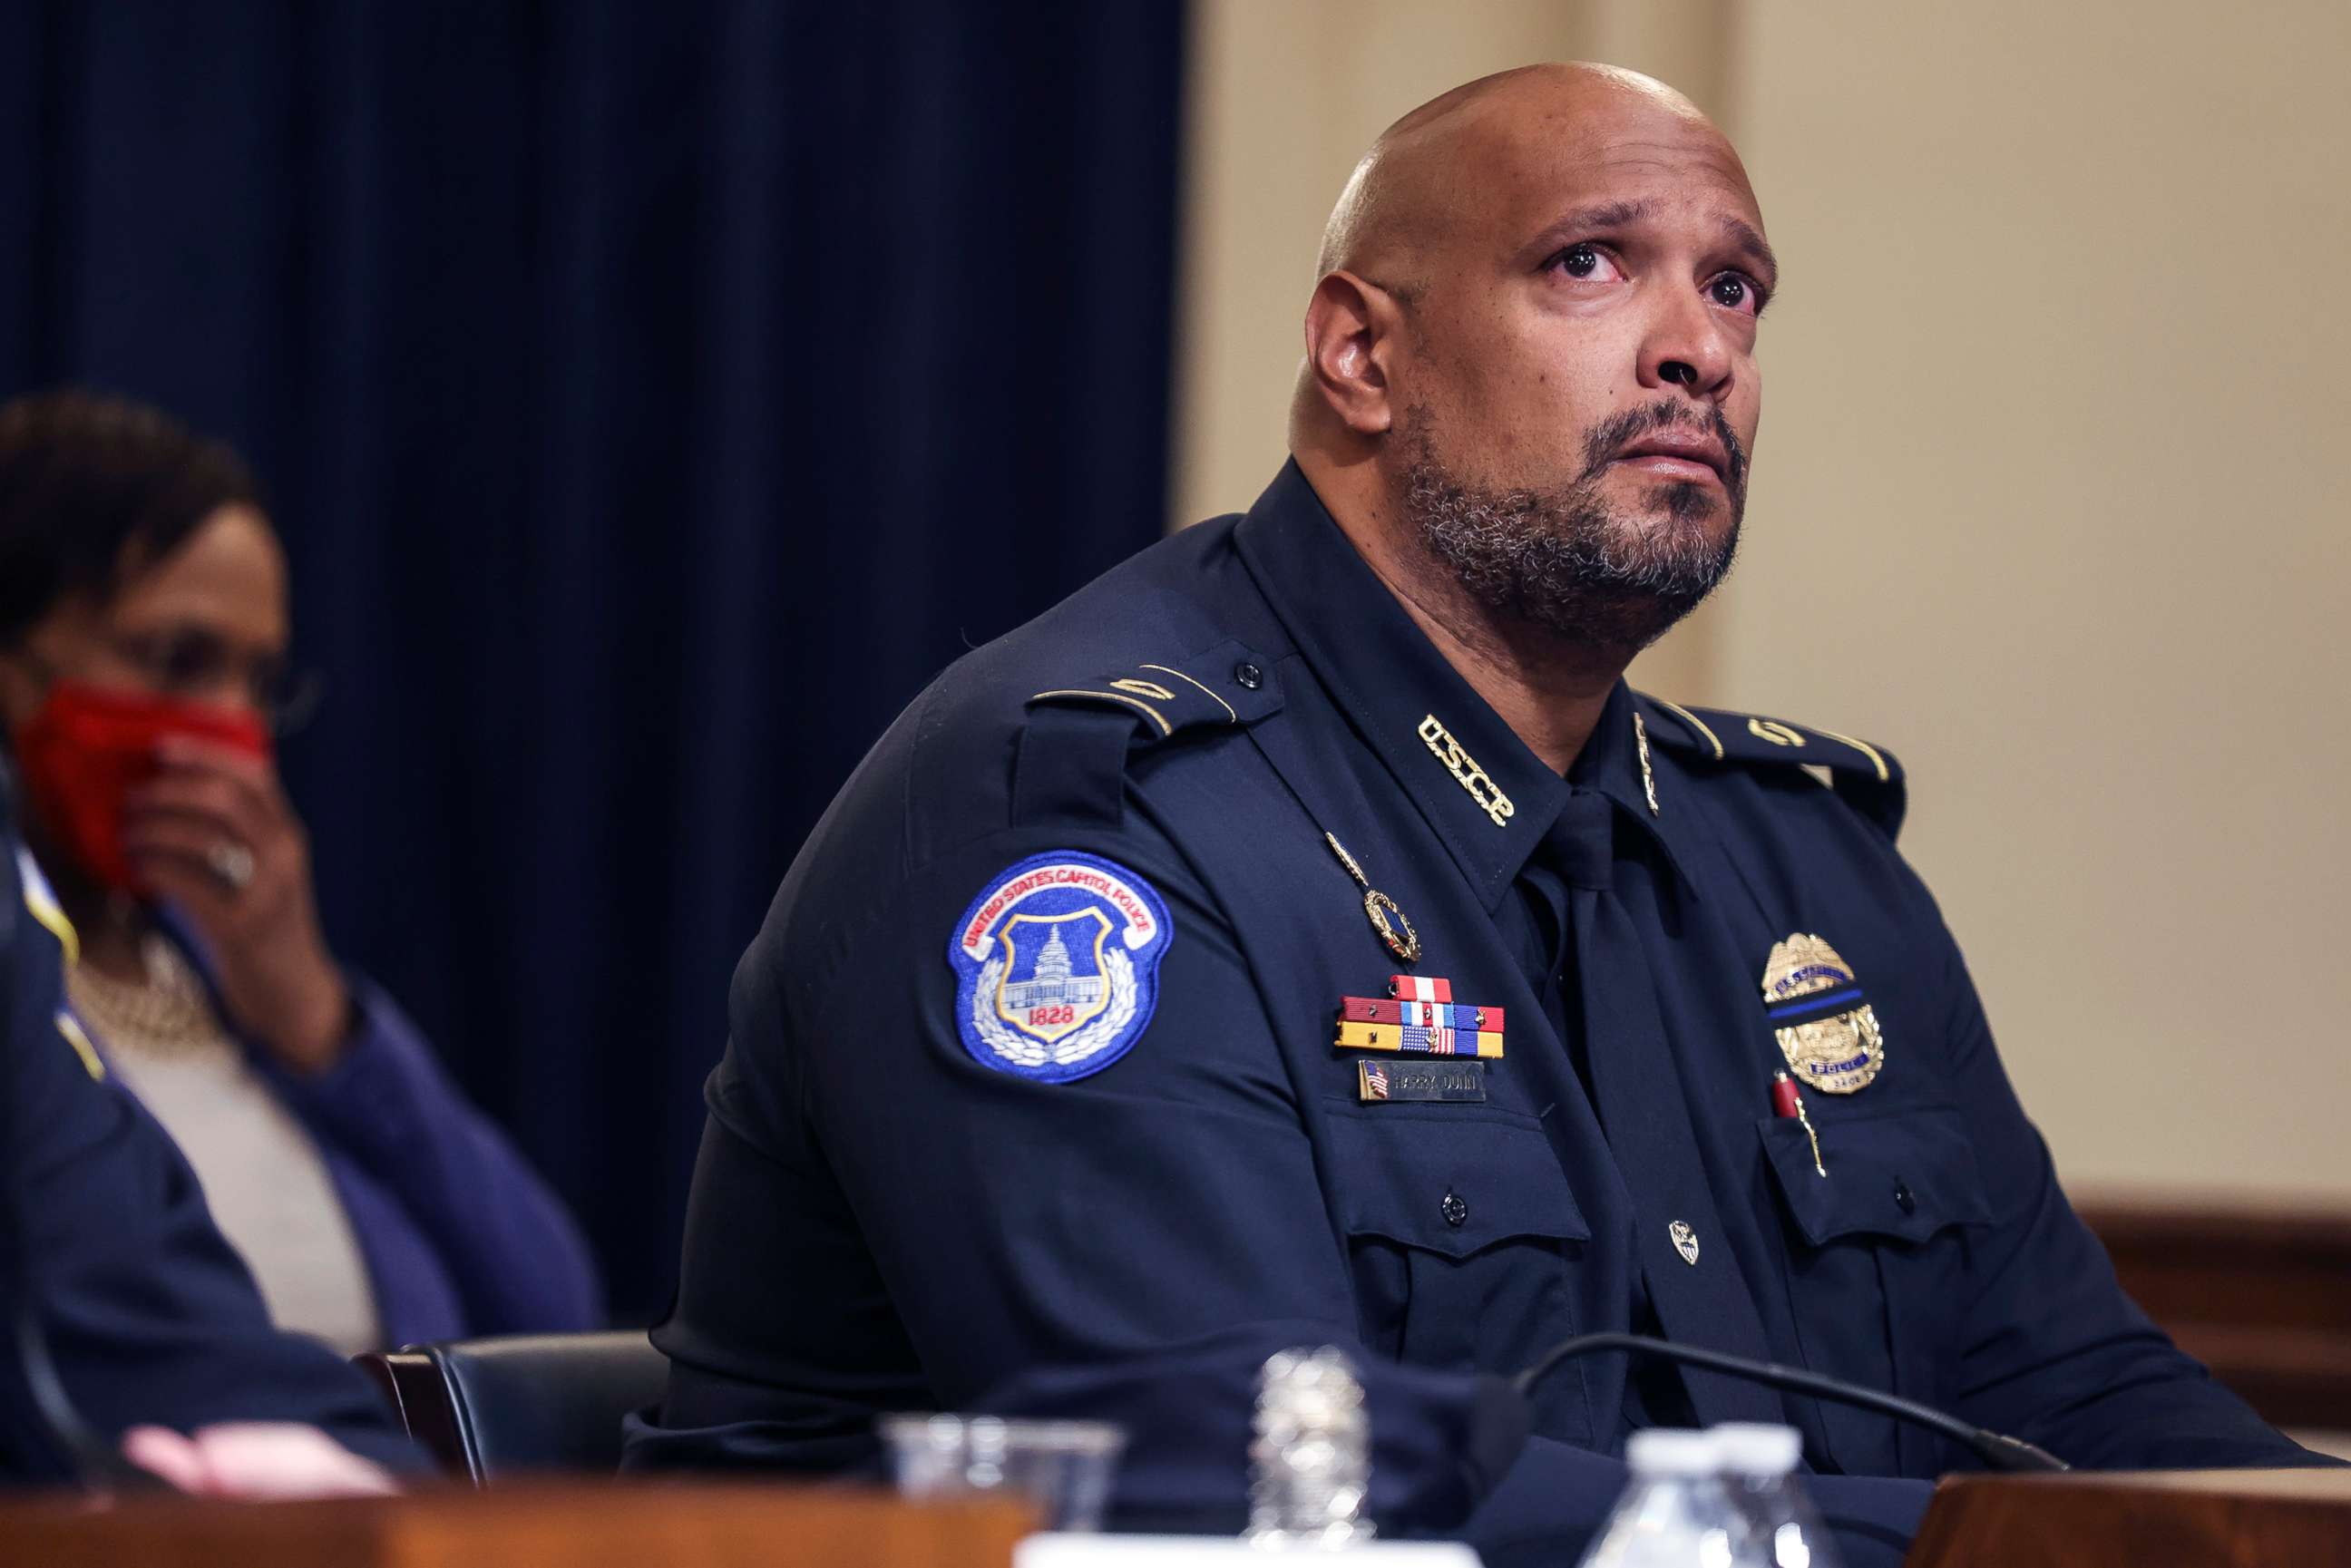 PHOTO: U.S. Capitol Police officer Harry Dunn becomes emotional as he testifies before the House Select Committee investigating the January 6 attack on the U.S. Capitol, July 27, 2021 at the Canon House Office Building in Washington, D.C.